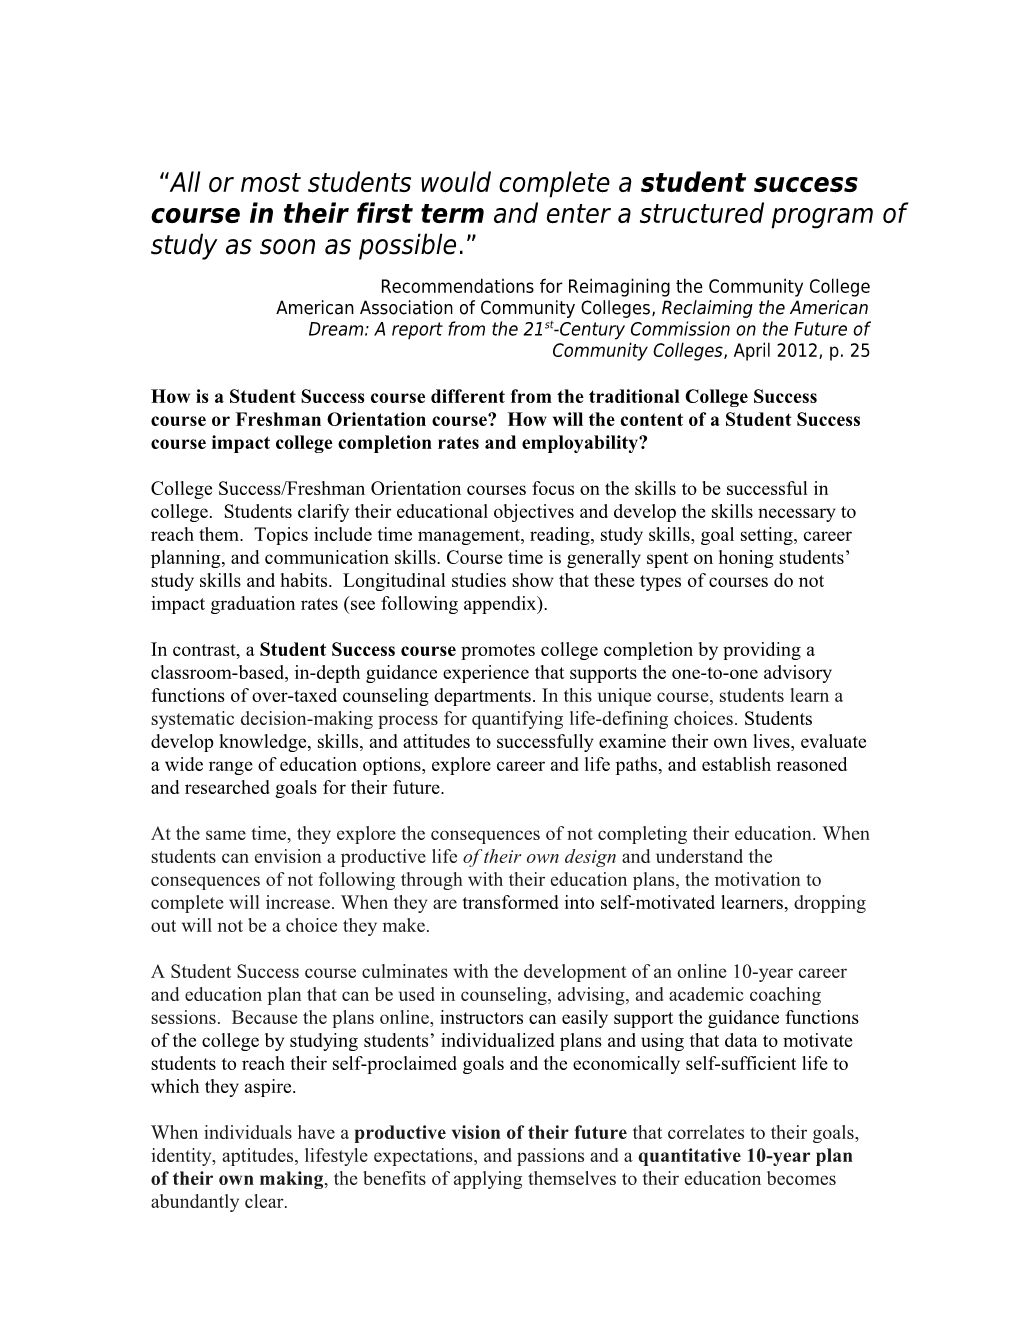 What Is the Definition of Student Success